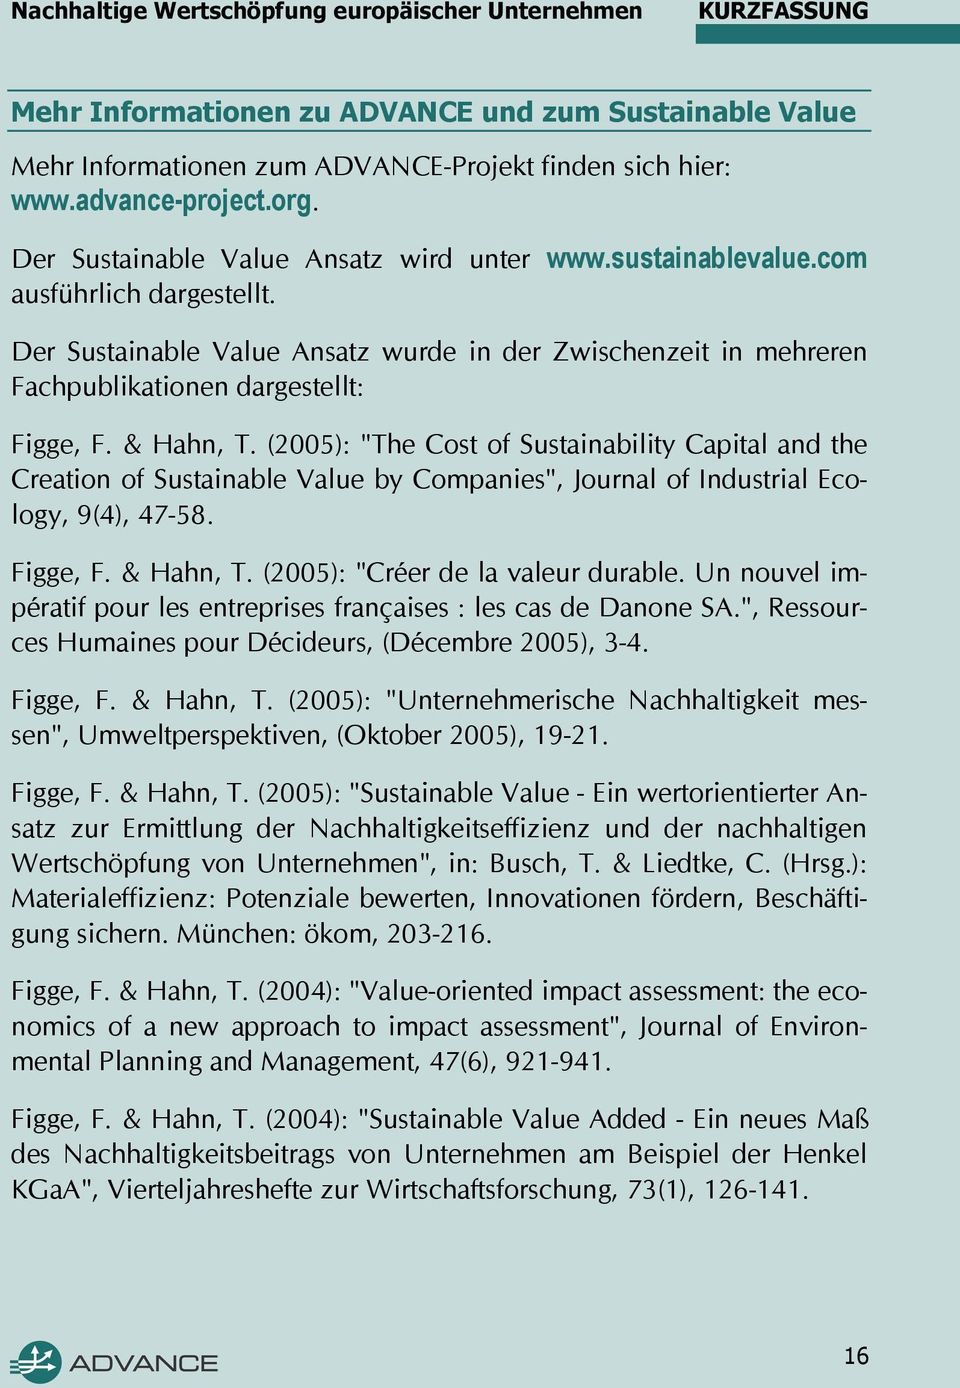 (2005): "The Cost of Sustainability Capital and the Creation of Sustainable Value by Companies", Journal of Industrial Ecology, 9(4), 47-58. Figge, F. & Hahn, T. (2005): "Créer de la valeur durable.